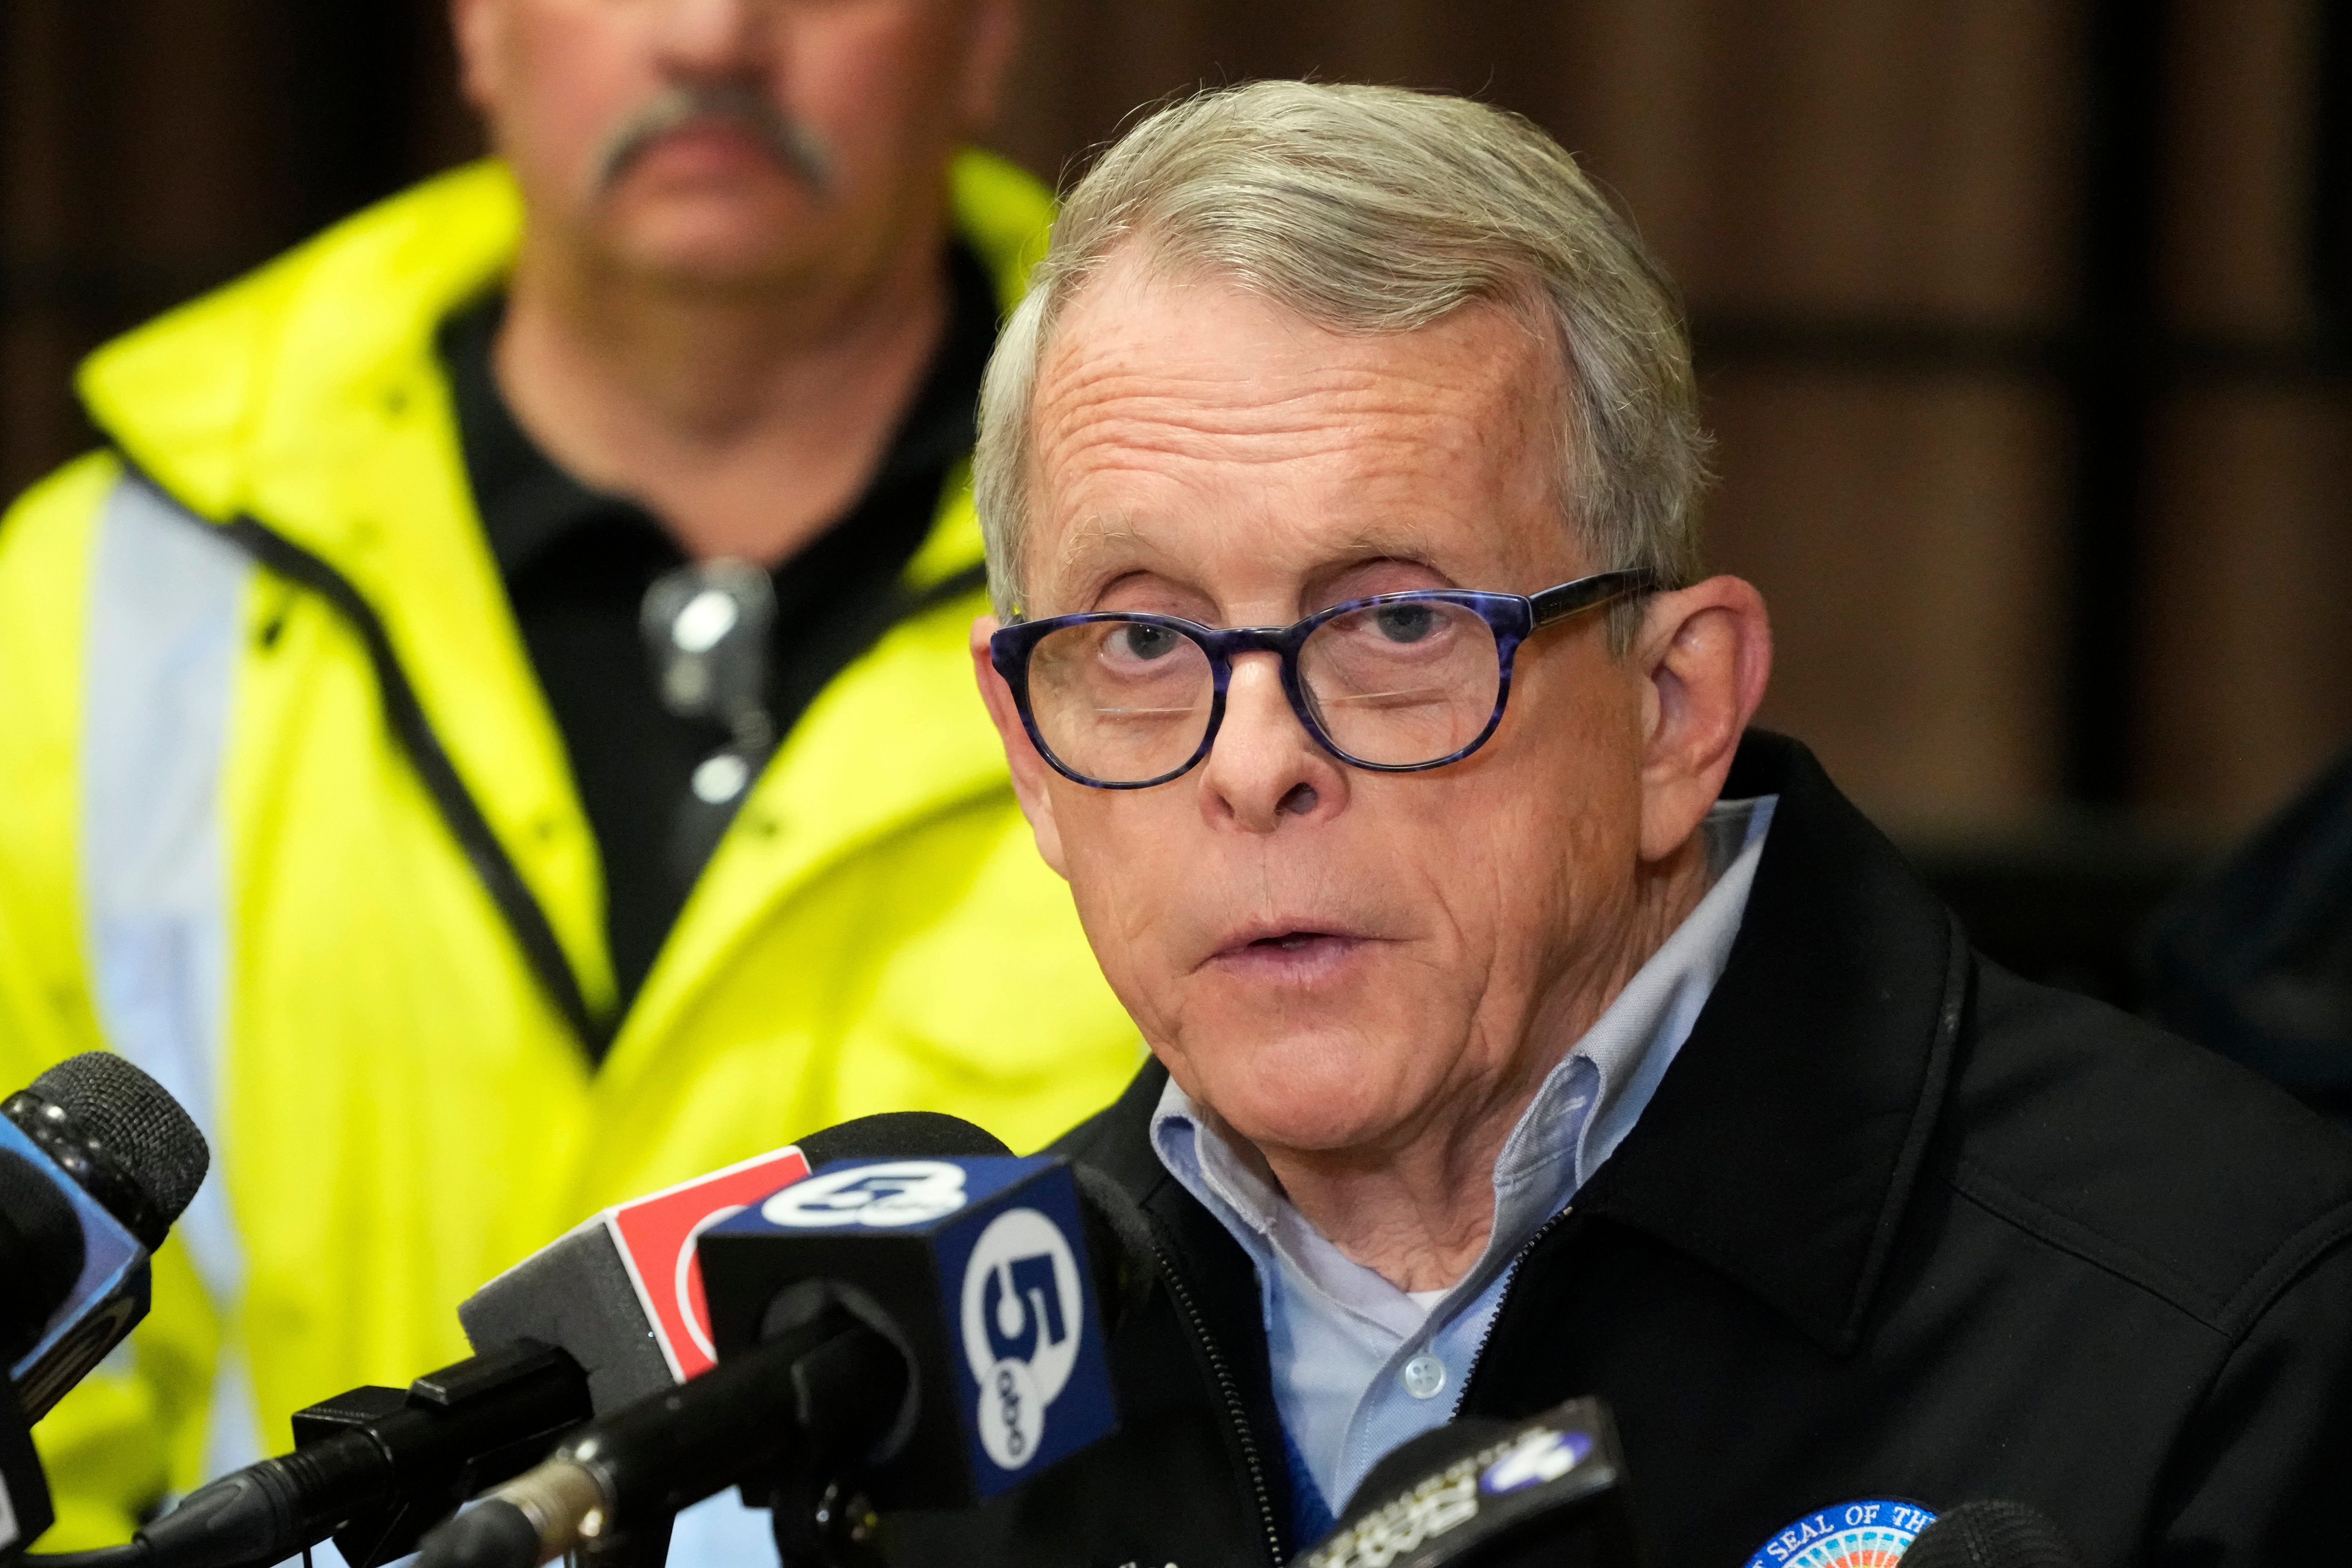 Ohio Gov. Mike DeWine meets with reporters after touring the Norfolk Southern train derailment site in East Palestine, Ohio, Monday, Feb. 6, 2023